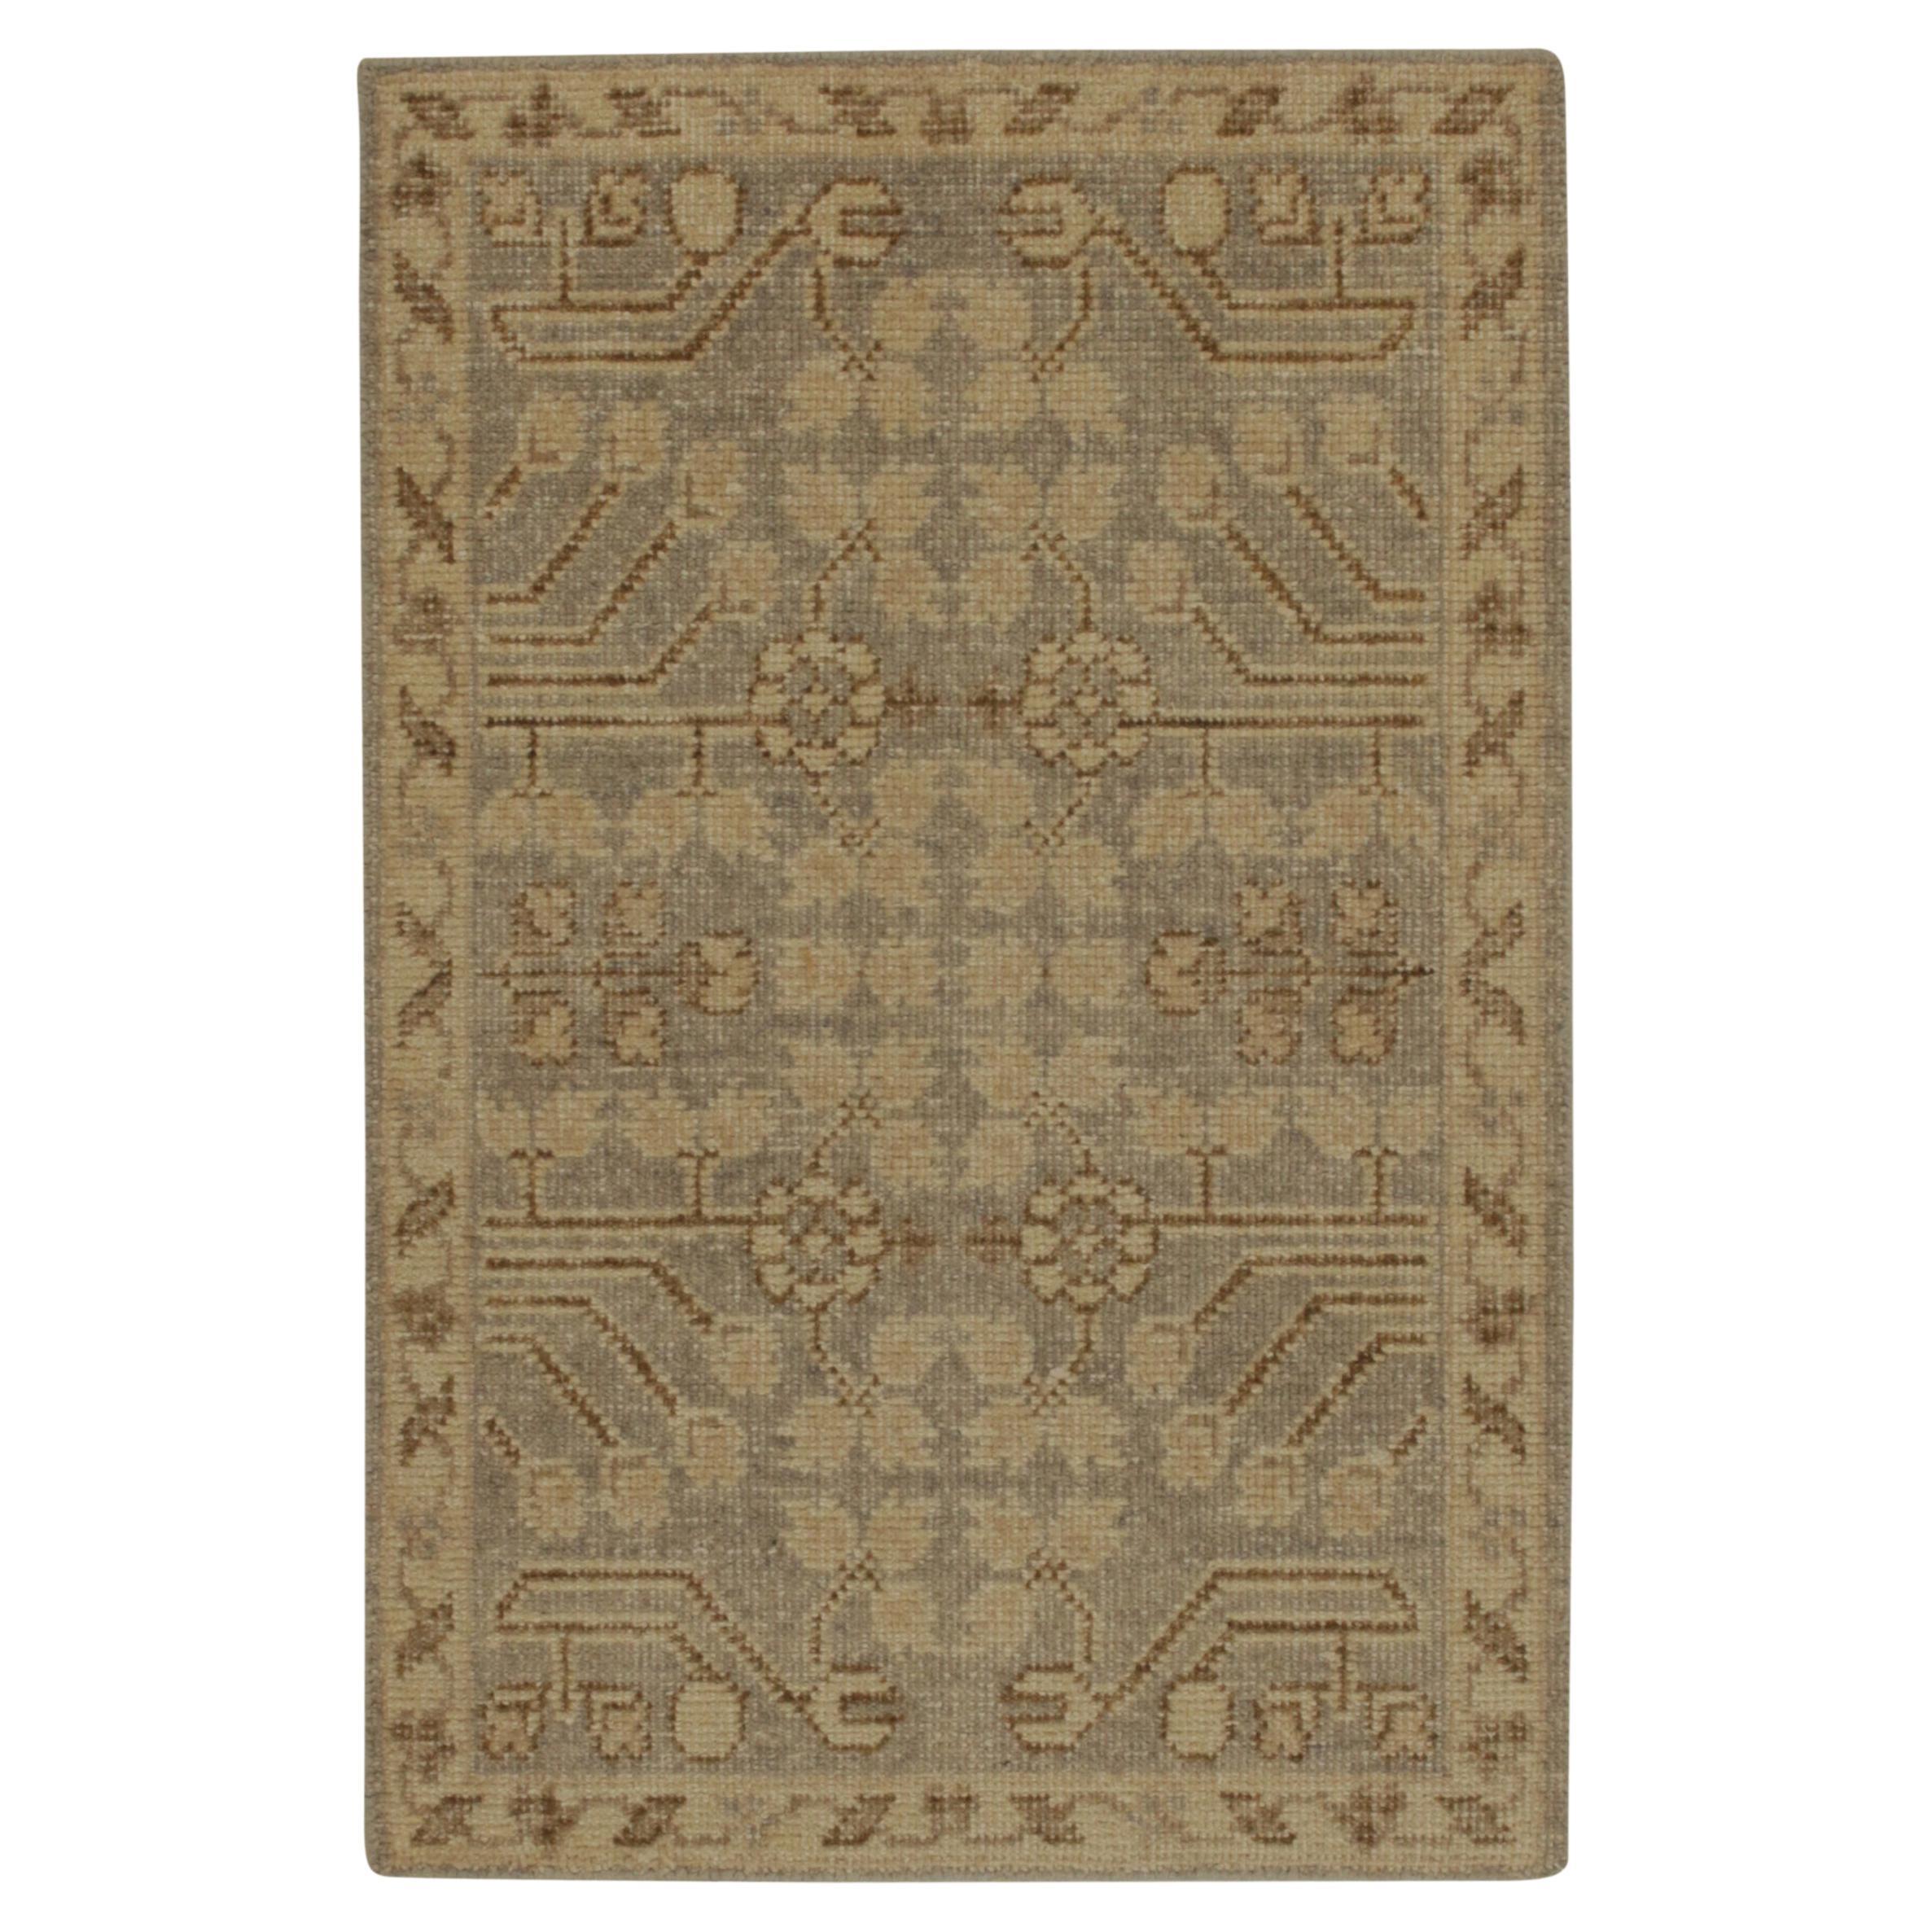 Rug & Kilim Distressed Khotan style rug in Gray with Beige-Brown Classic Pattern